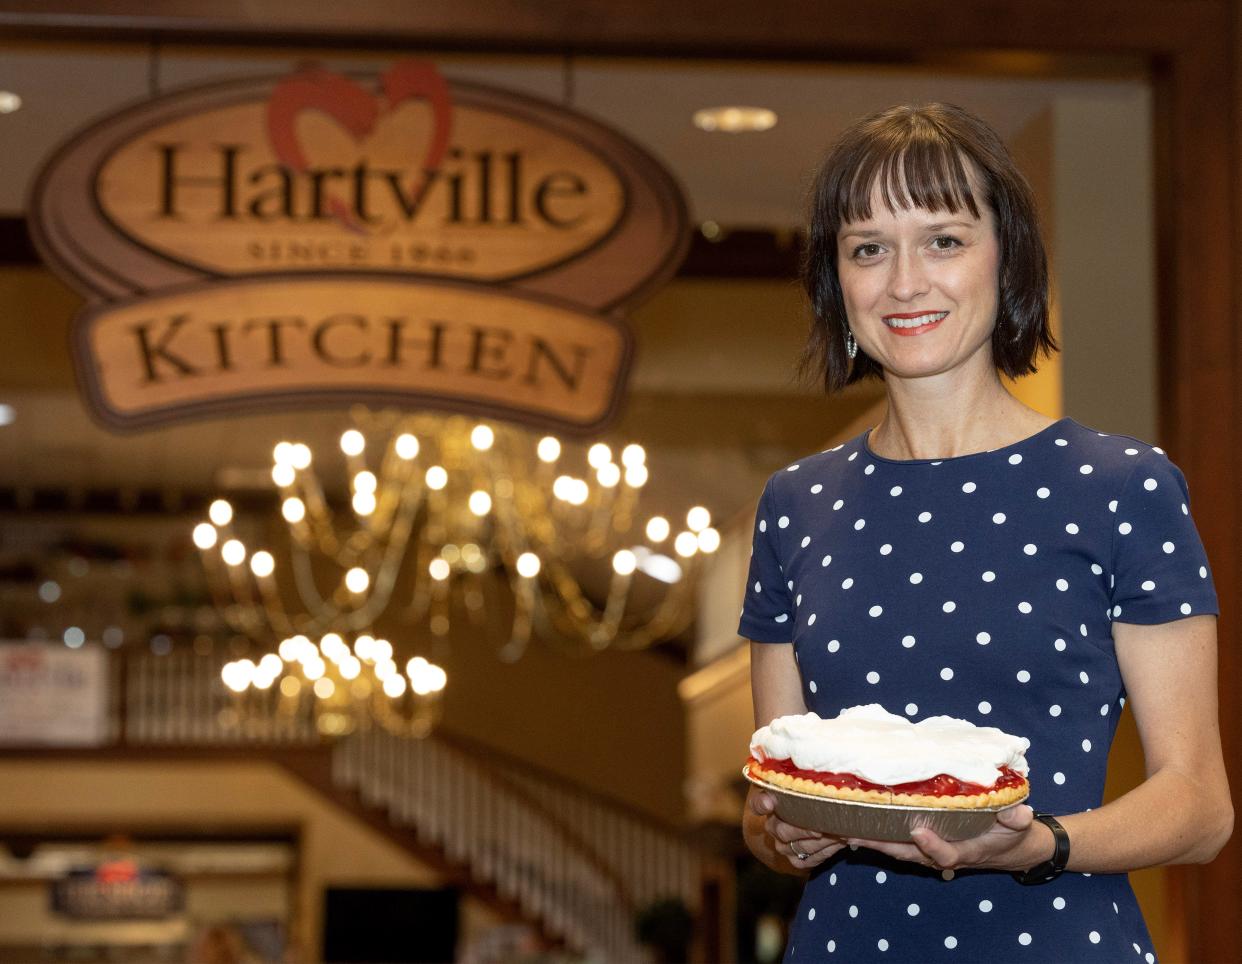 Christa Kozy is the marketing and group tours coordinator for Hartville Kitchen Restaurant & Bakery in Hartville. She also coordinates the destination marketing campaigns and outreach events for the campus, which includes Hartville Hardware, Hartville MarketPlace and Hartville Kitchen Restaurant & Bakery.